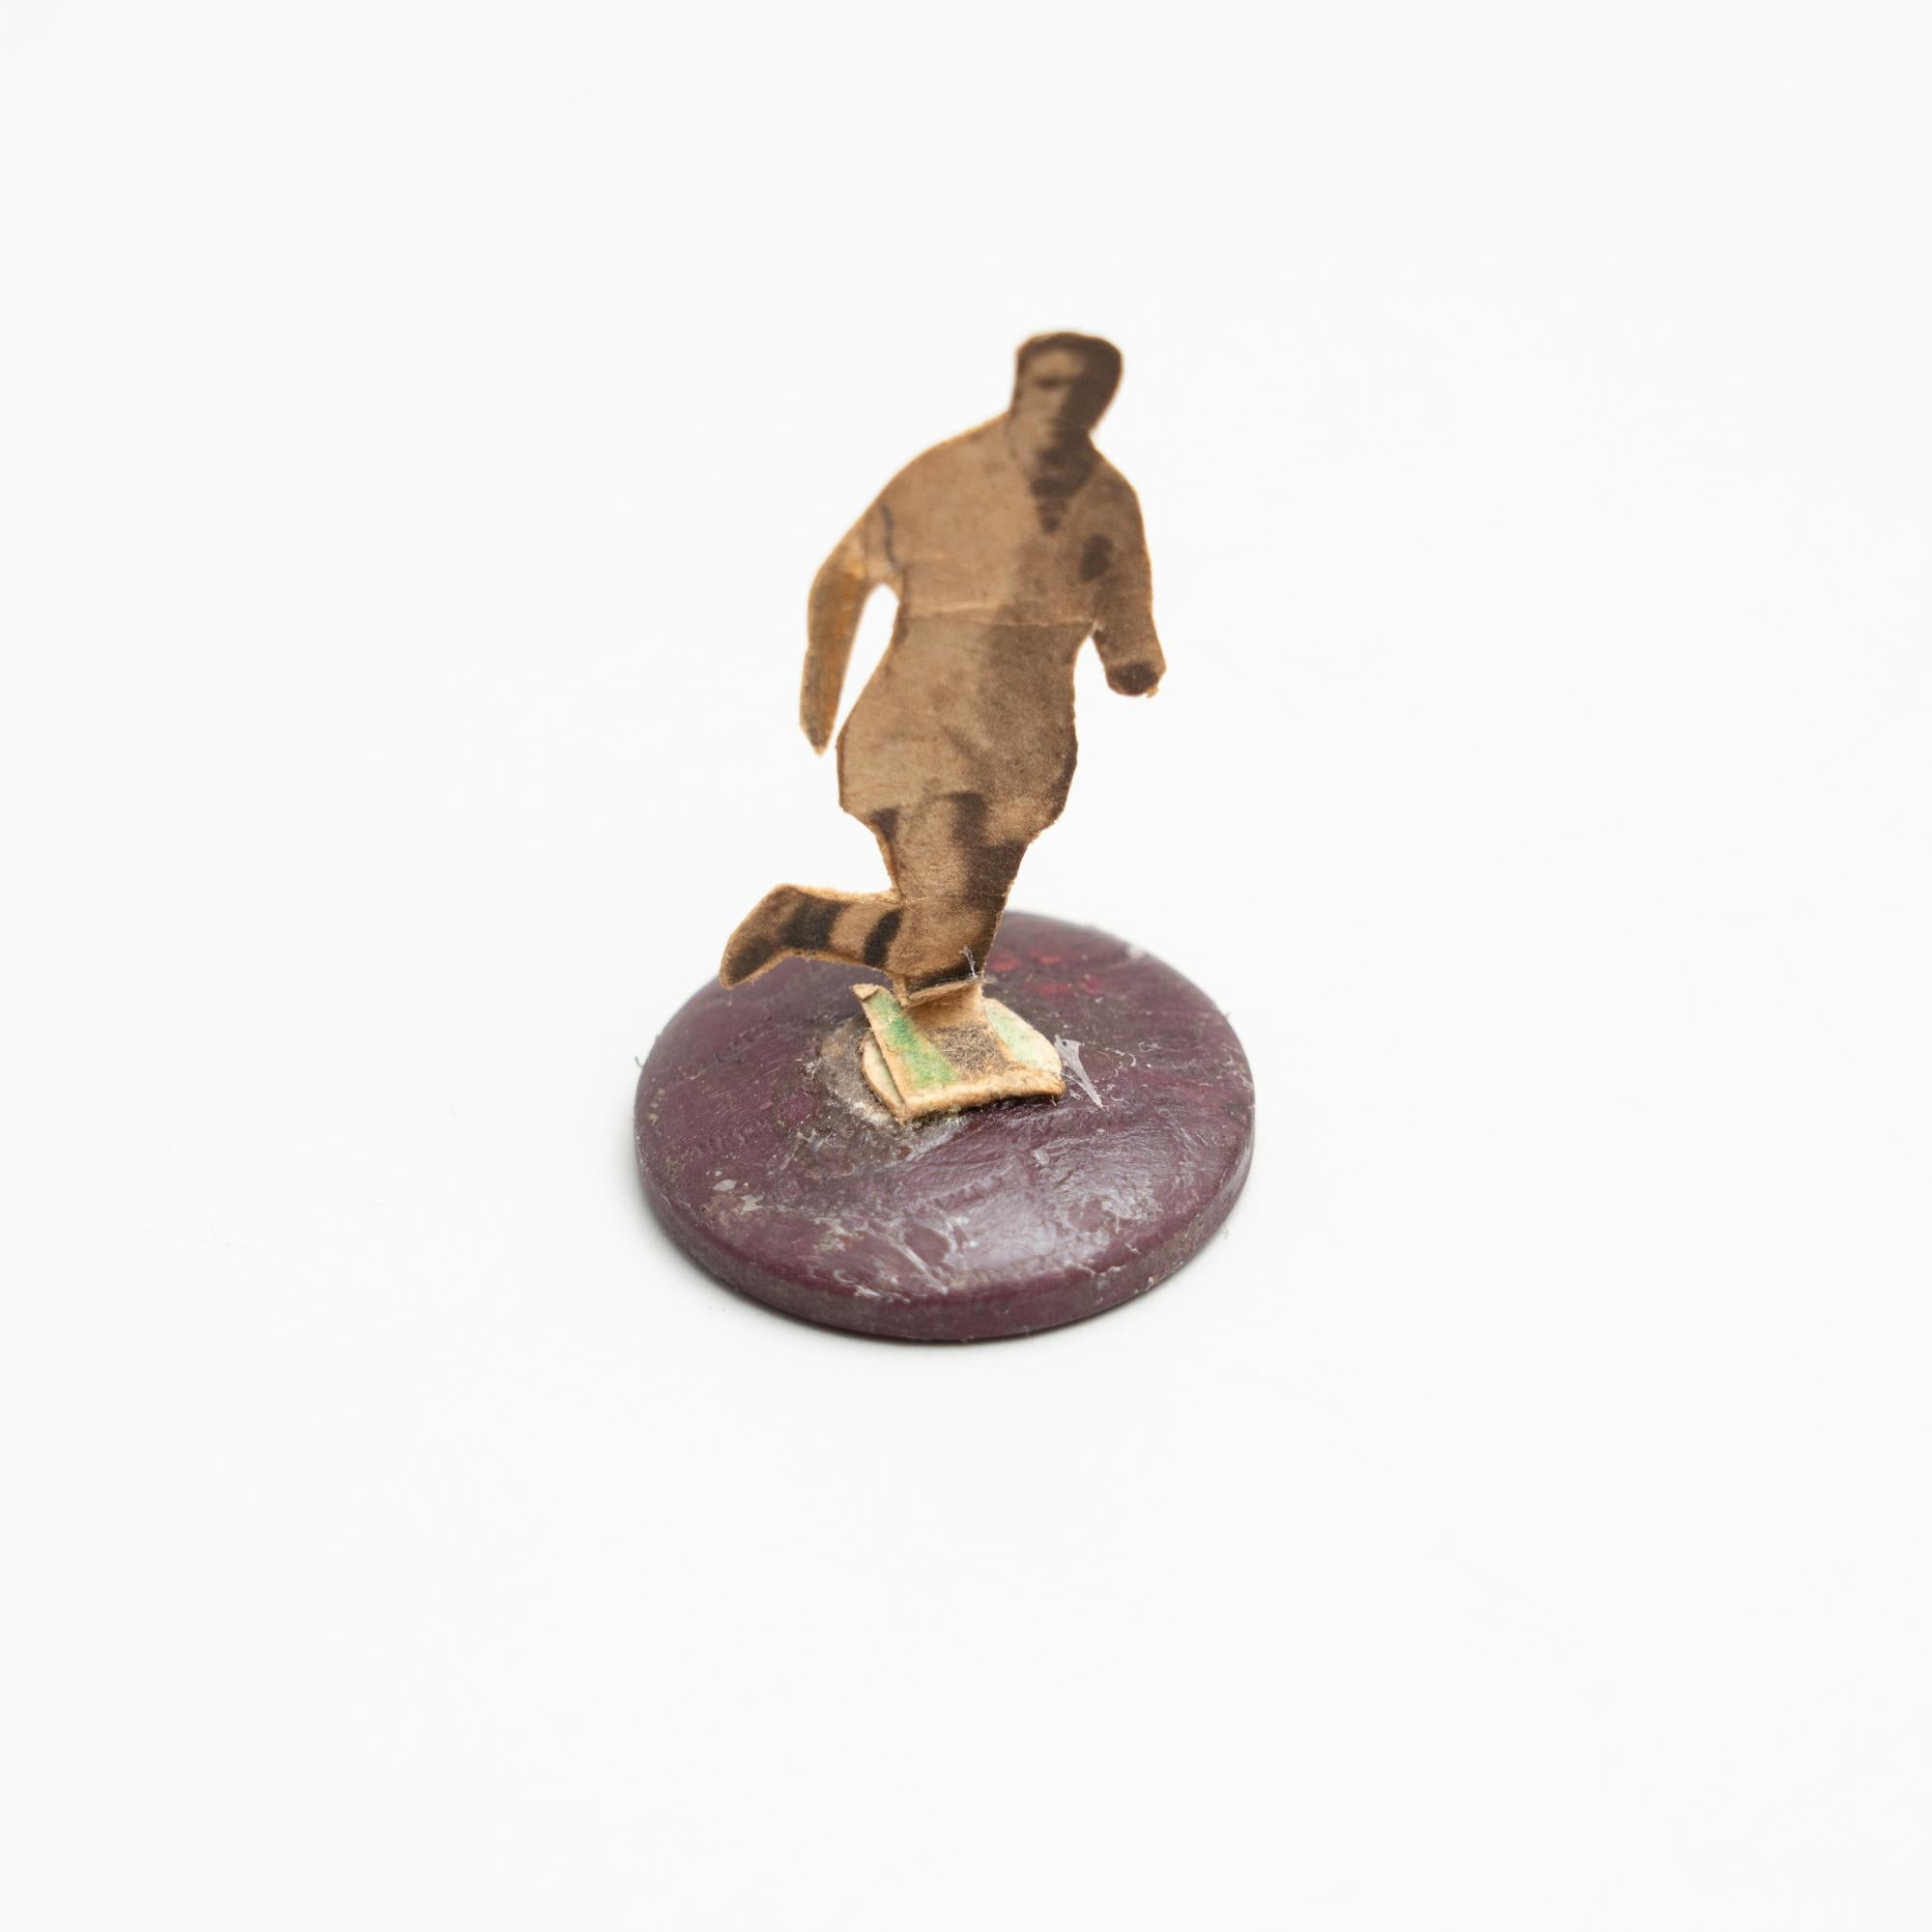 Set of 2 Traditional Antique Button Soccer Game Figures, circa 1950 For Sale 1